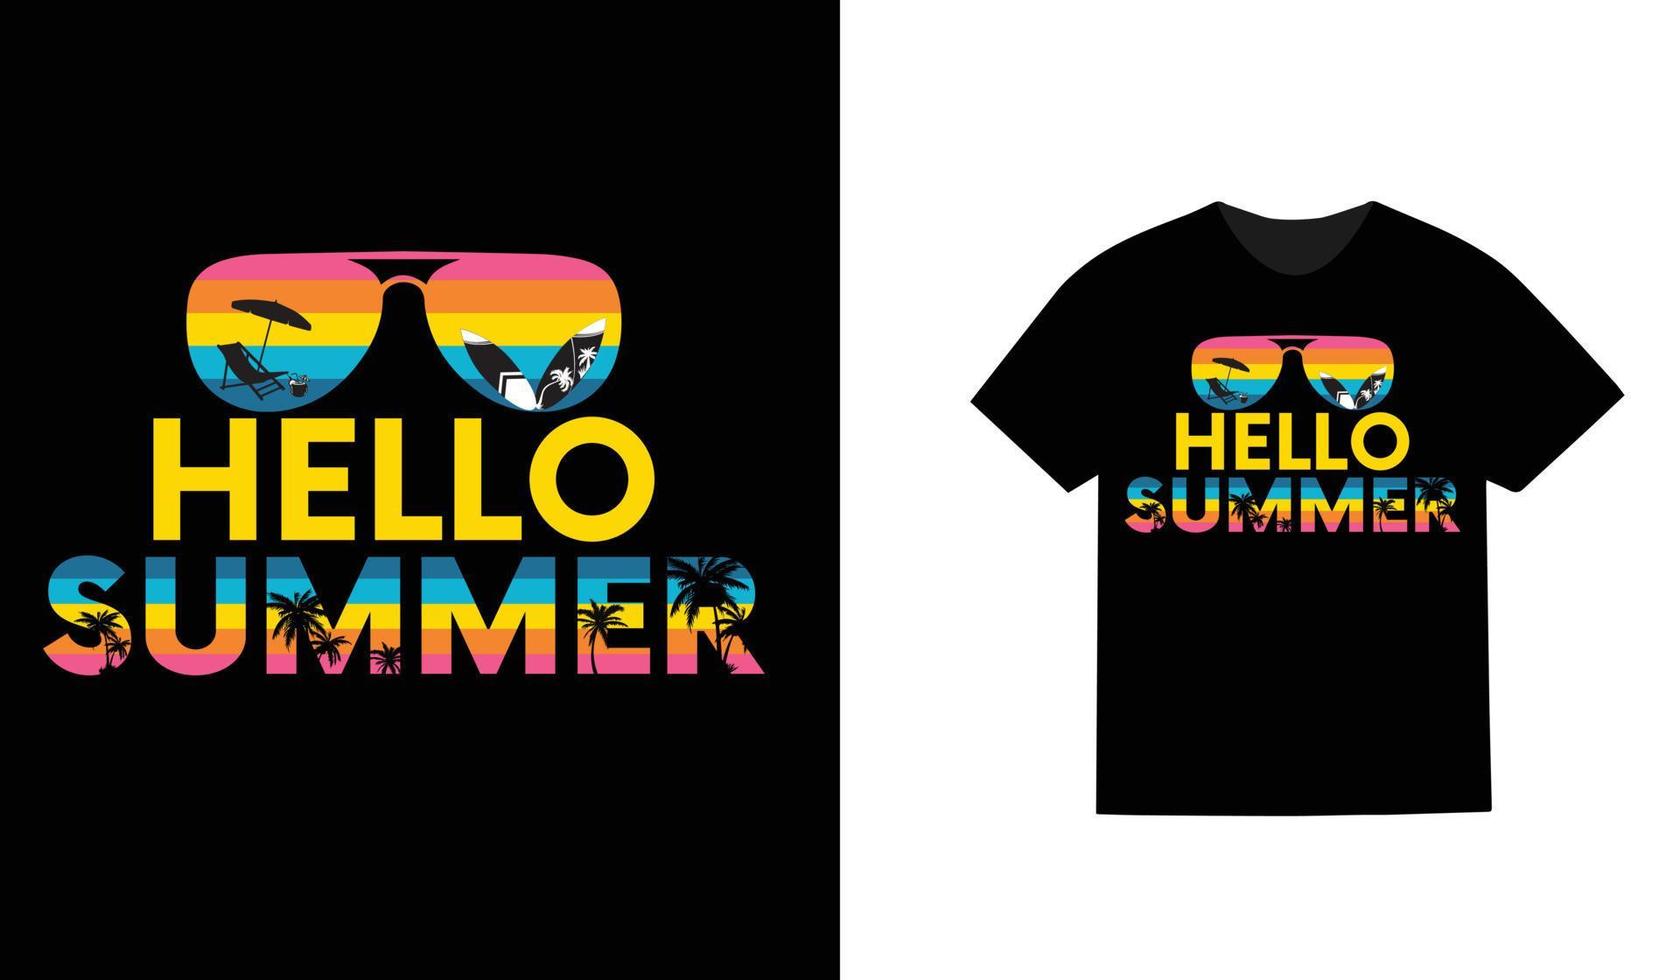 Hello summer free vector and t-shirt design.